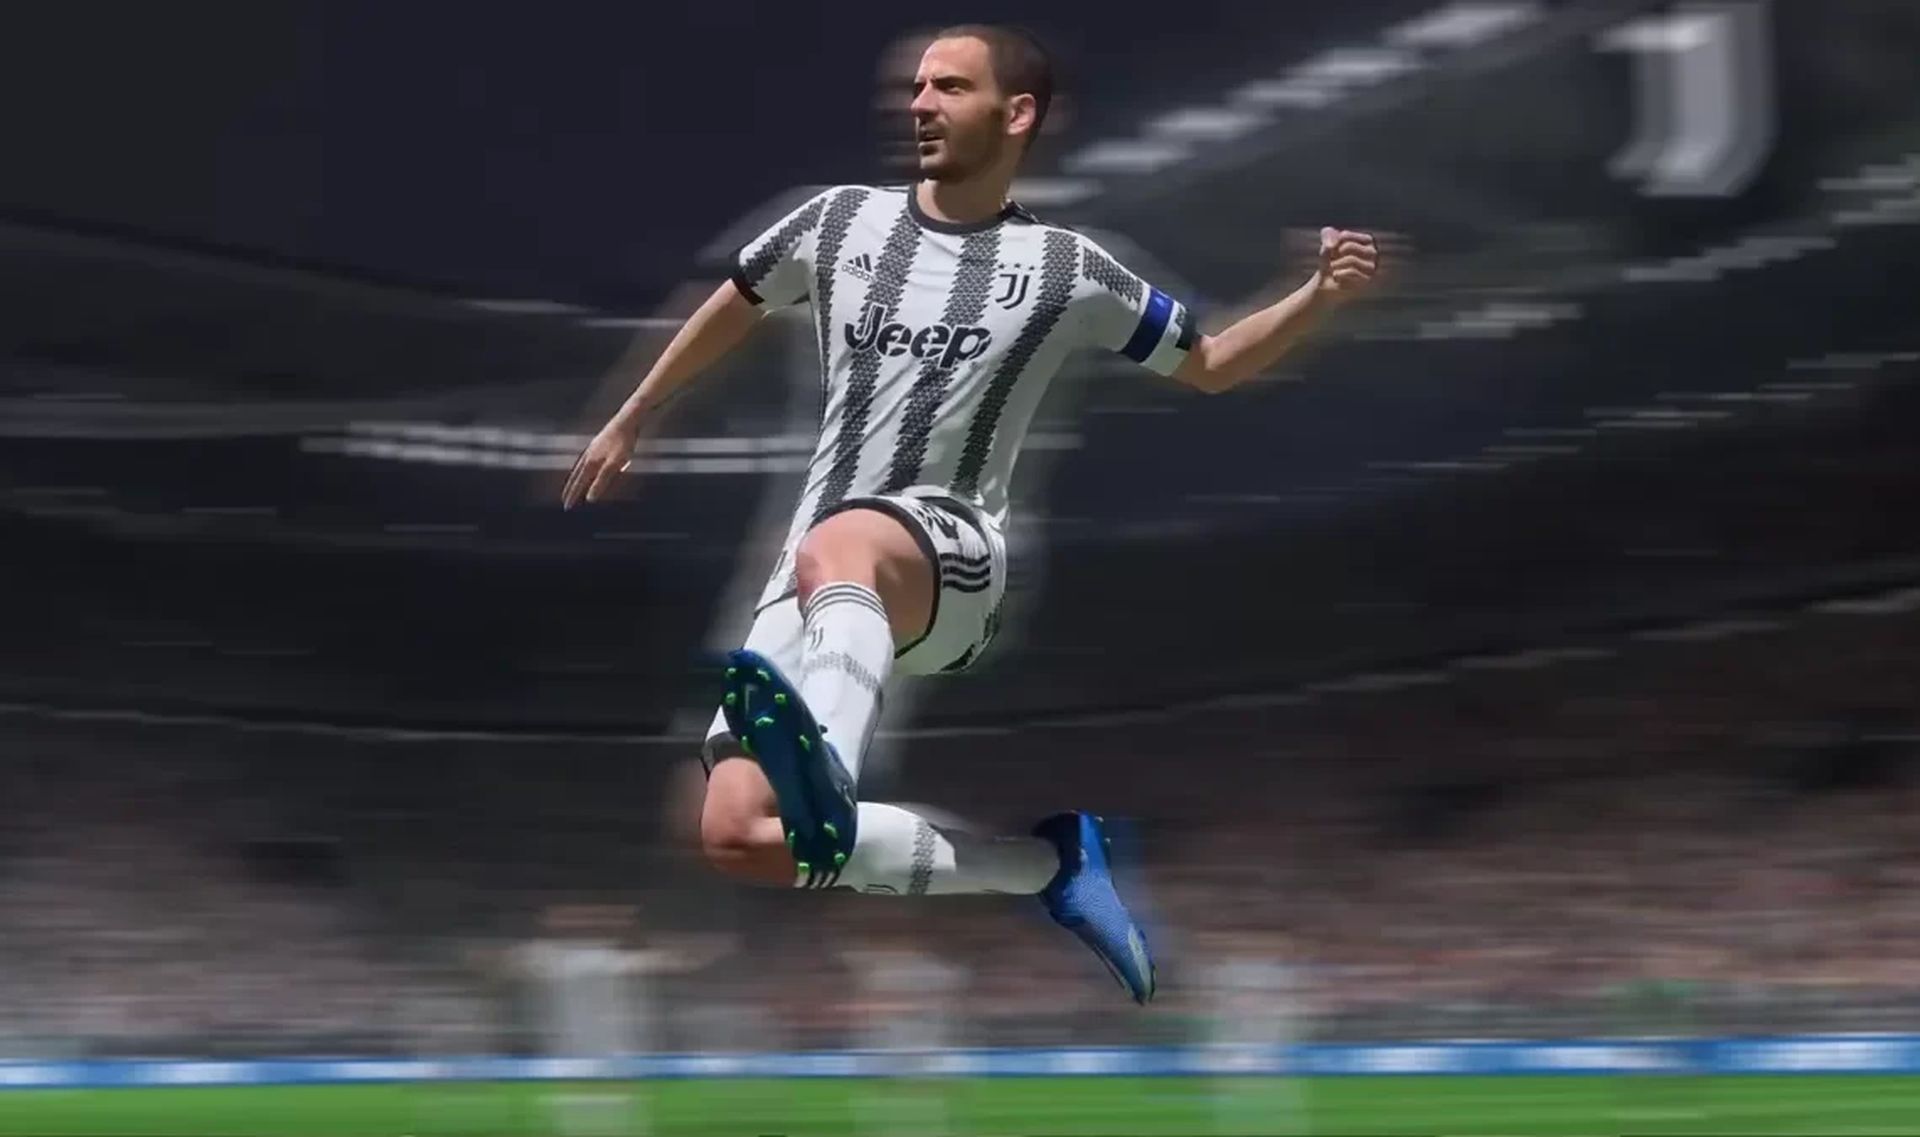 In this article, we are going to be covering FIFA 23 Juventus reveal and its trailer, as the famous Italian club returns to the popular football franchise.